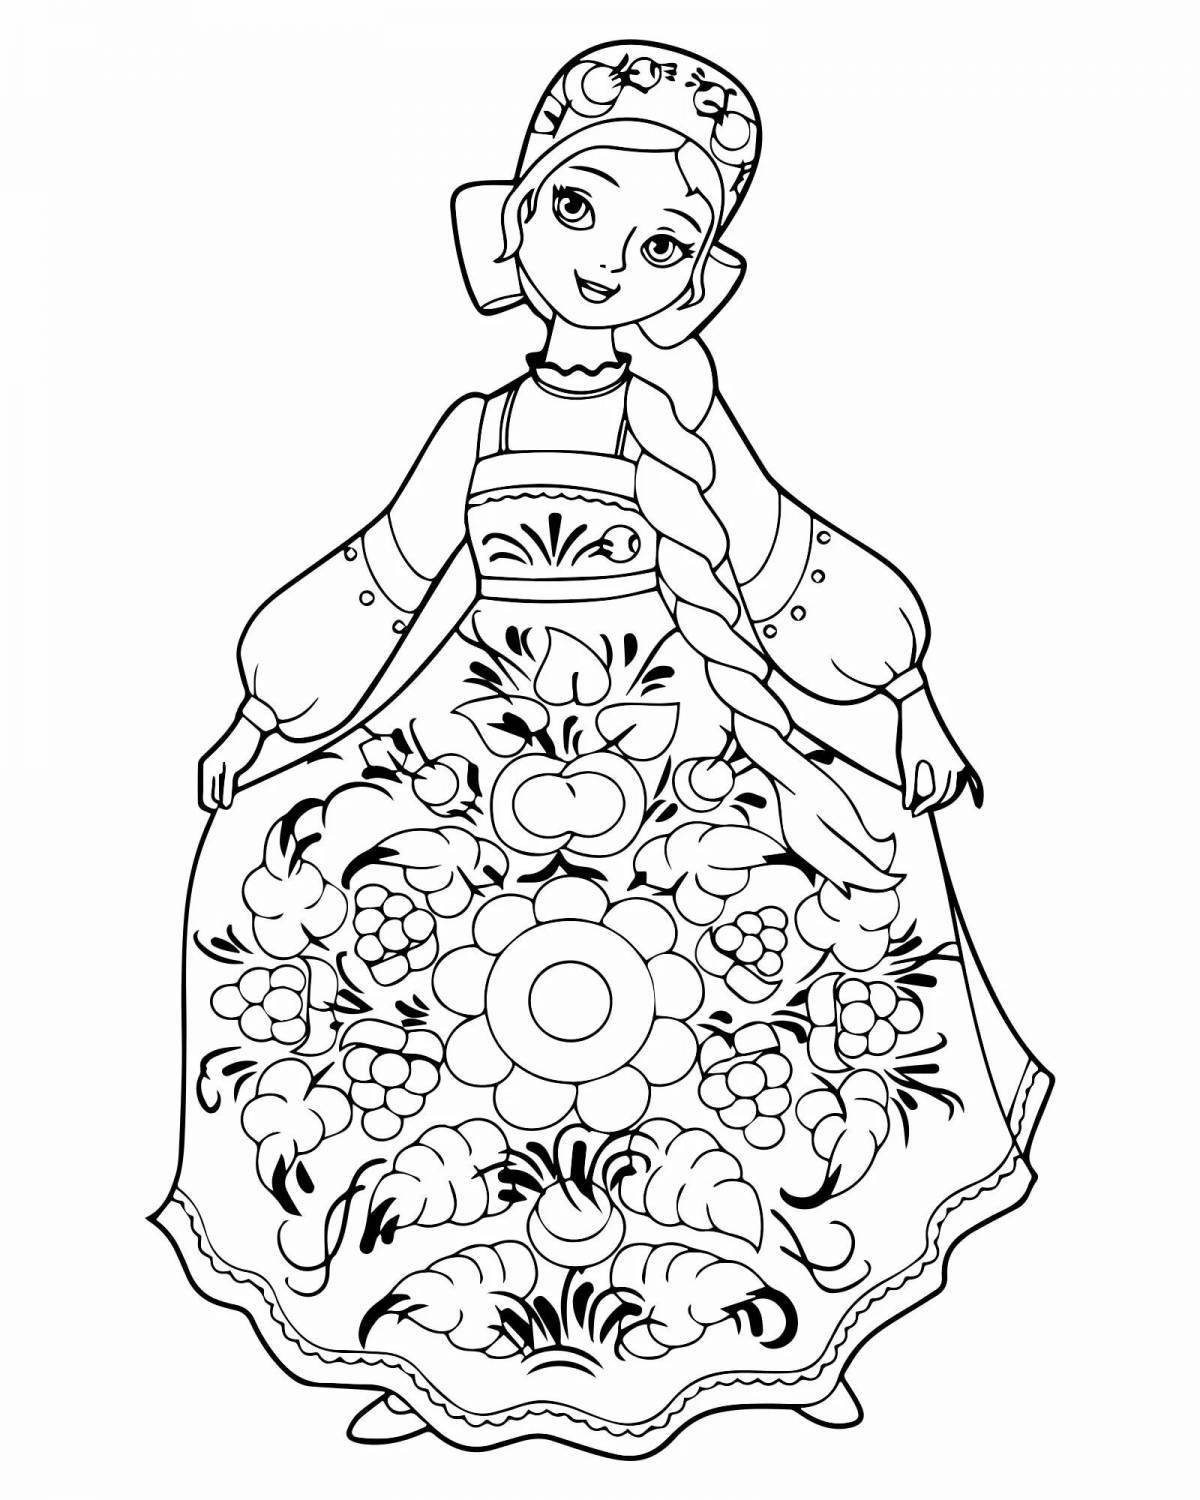 Playful Russian traditions coloring page